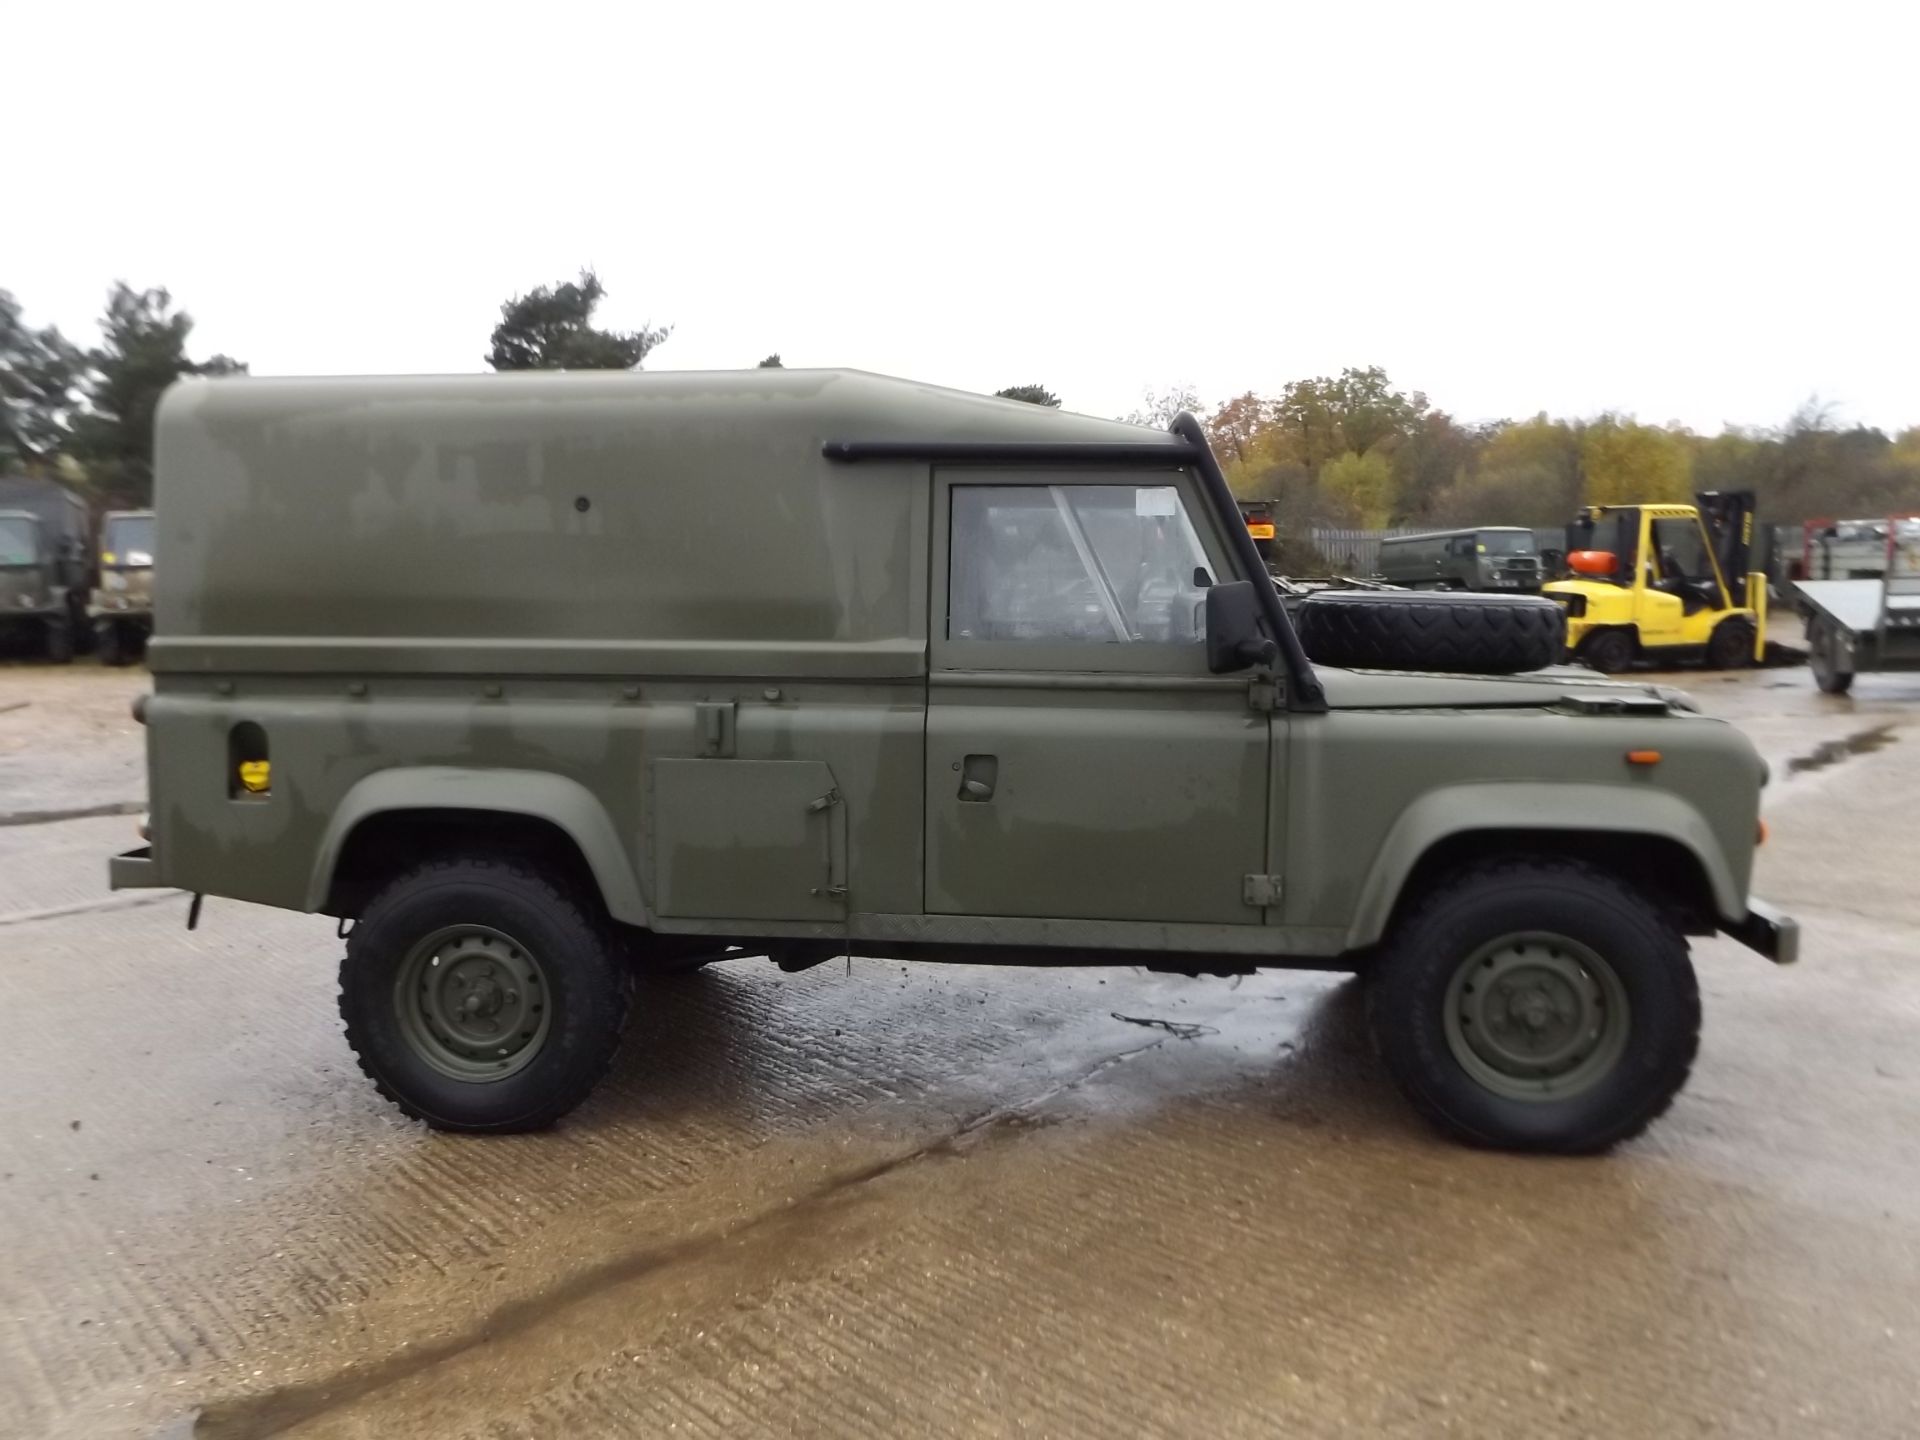 LHD Land Rover TITHONUS 110 Hard Top - Image 5 of 16